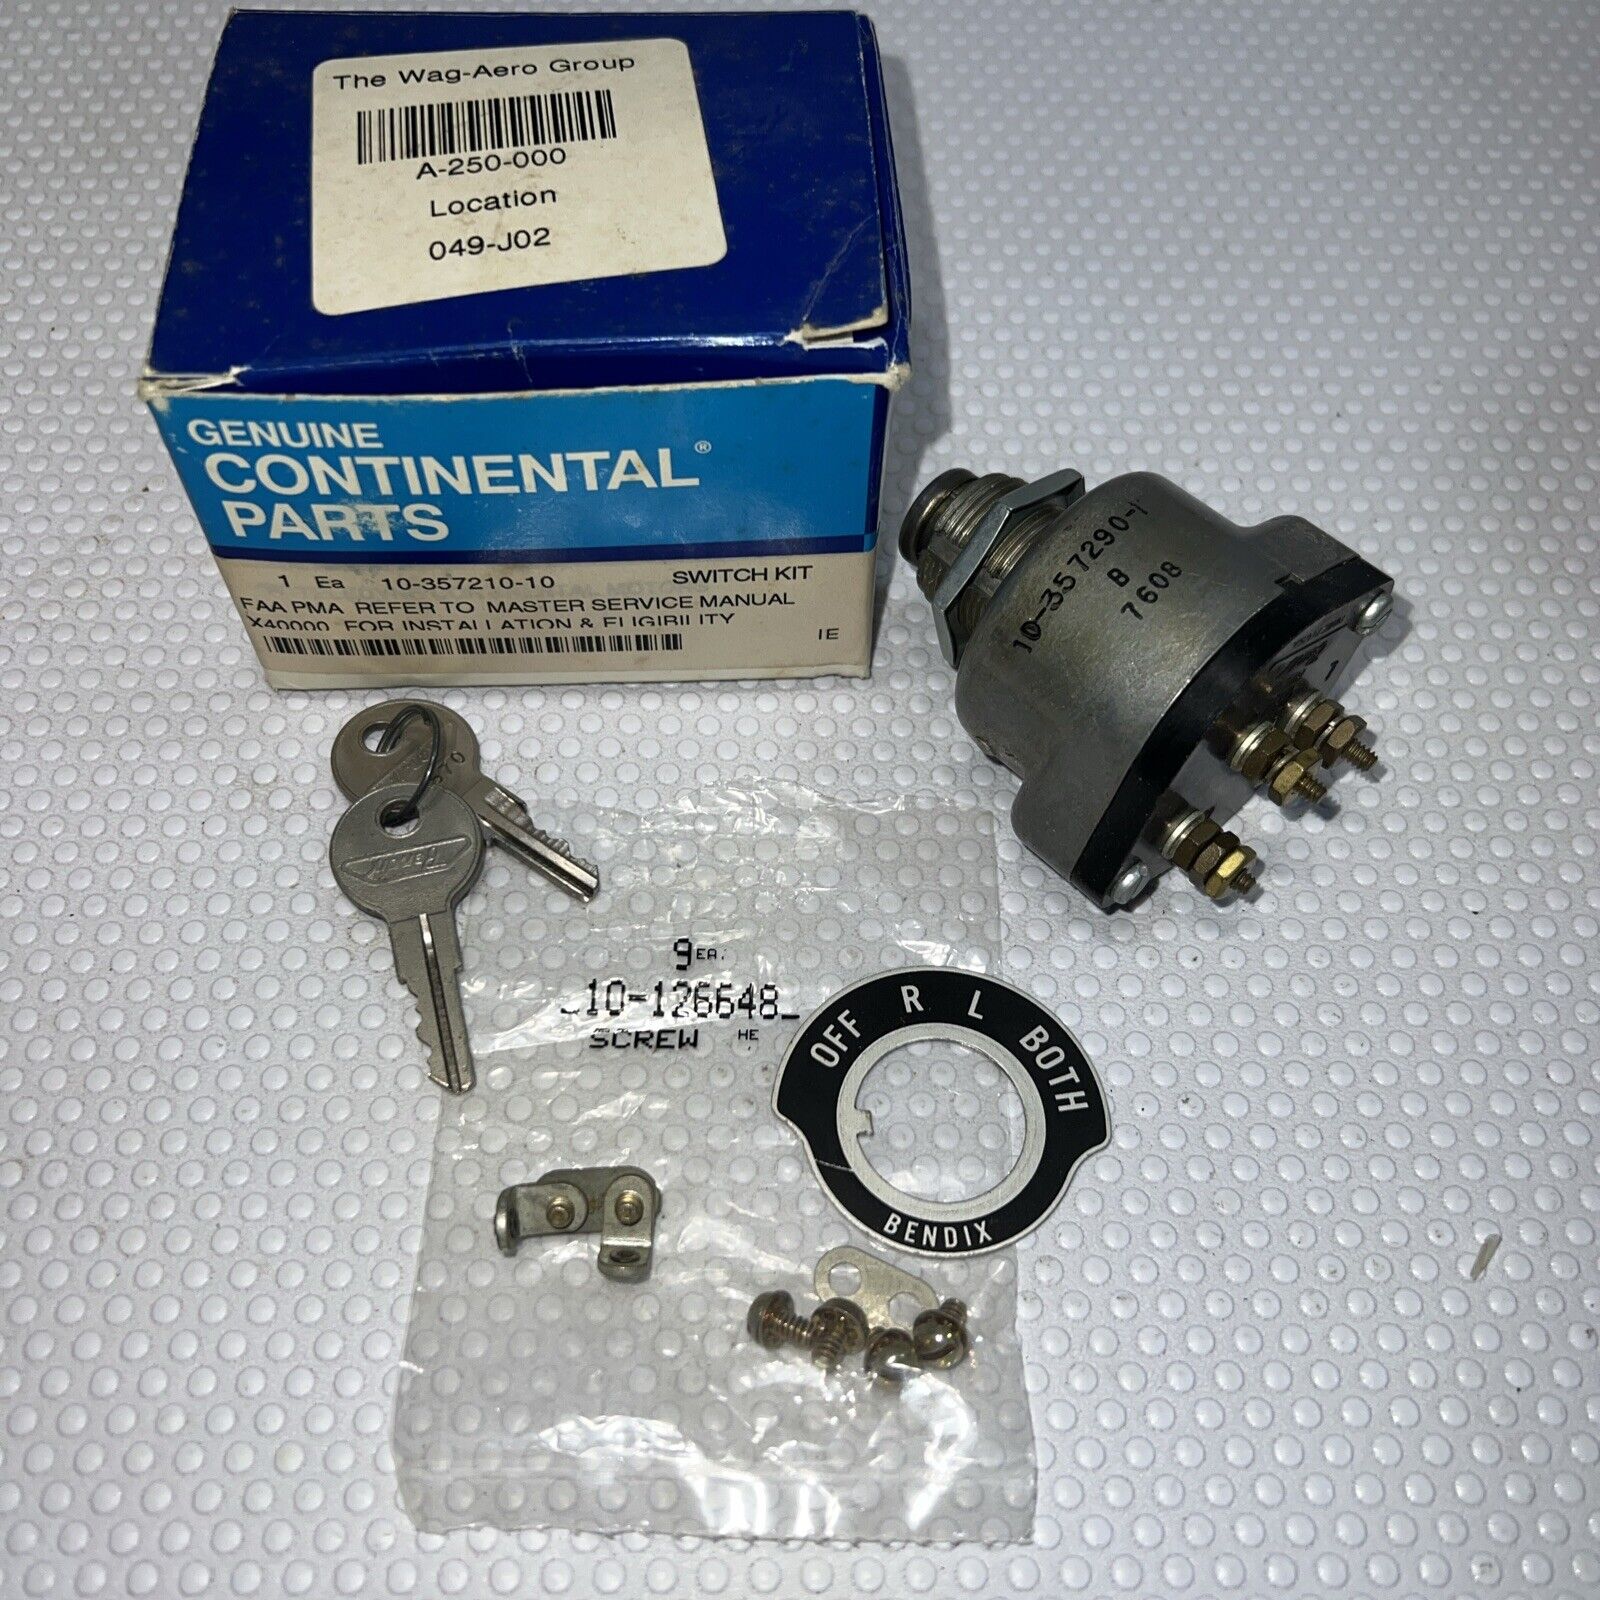 NEW Bendix Aircraft Airplane SWITCH-IGNITION L/R/BOTH/START Placard & KEYS